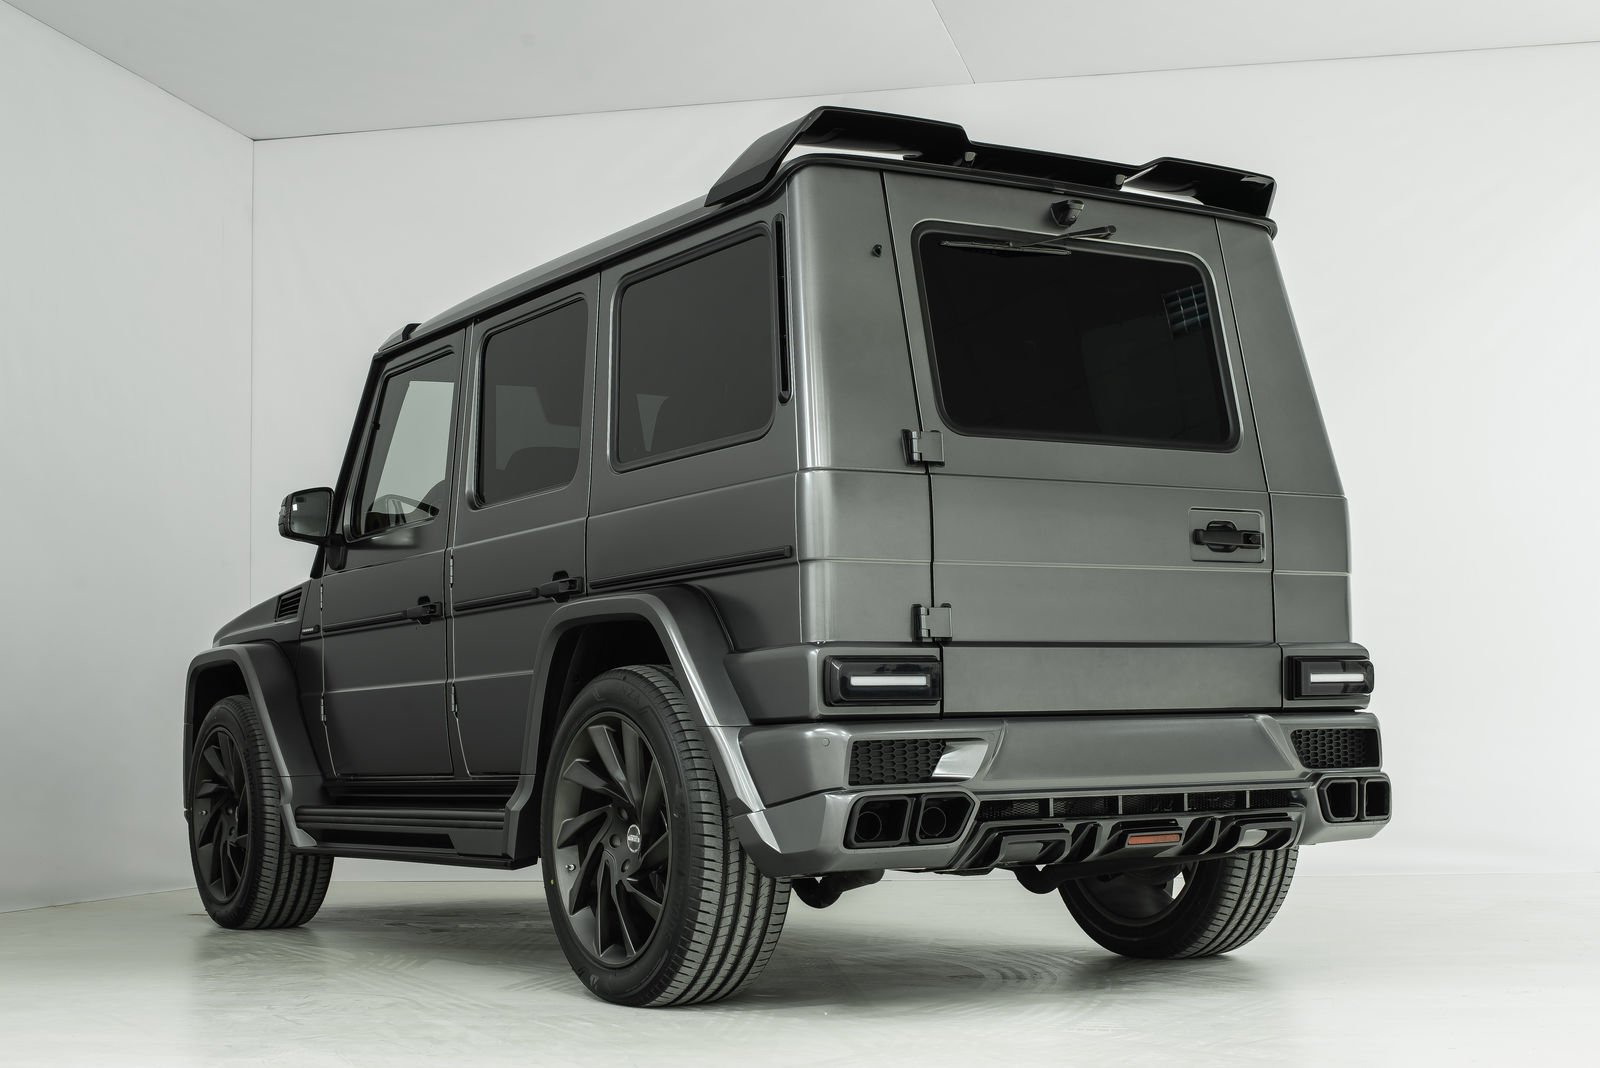 SCL PERFORMANCE DIAMANT body kit for MERCEDES G-CLASS